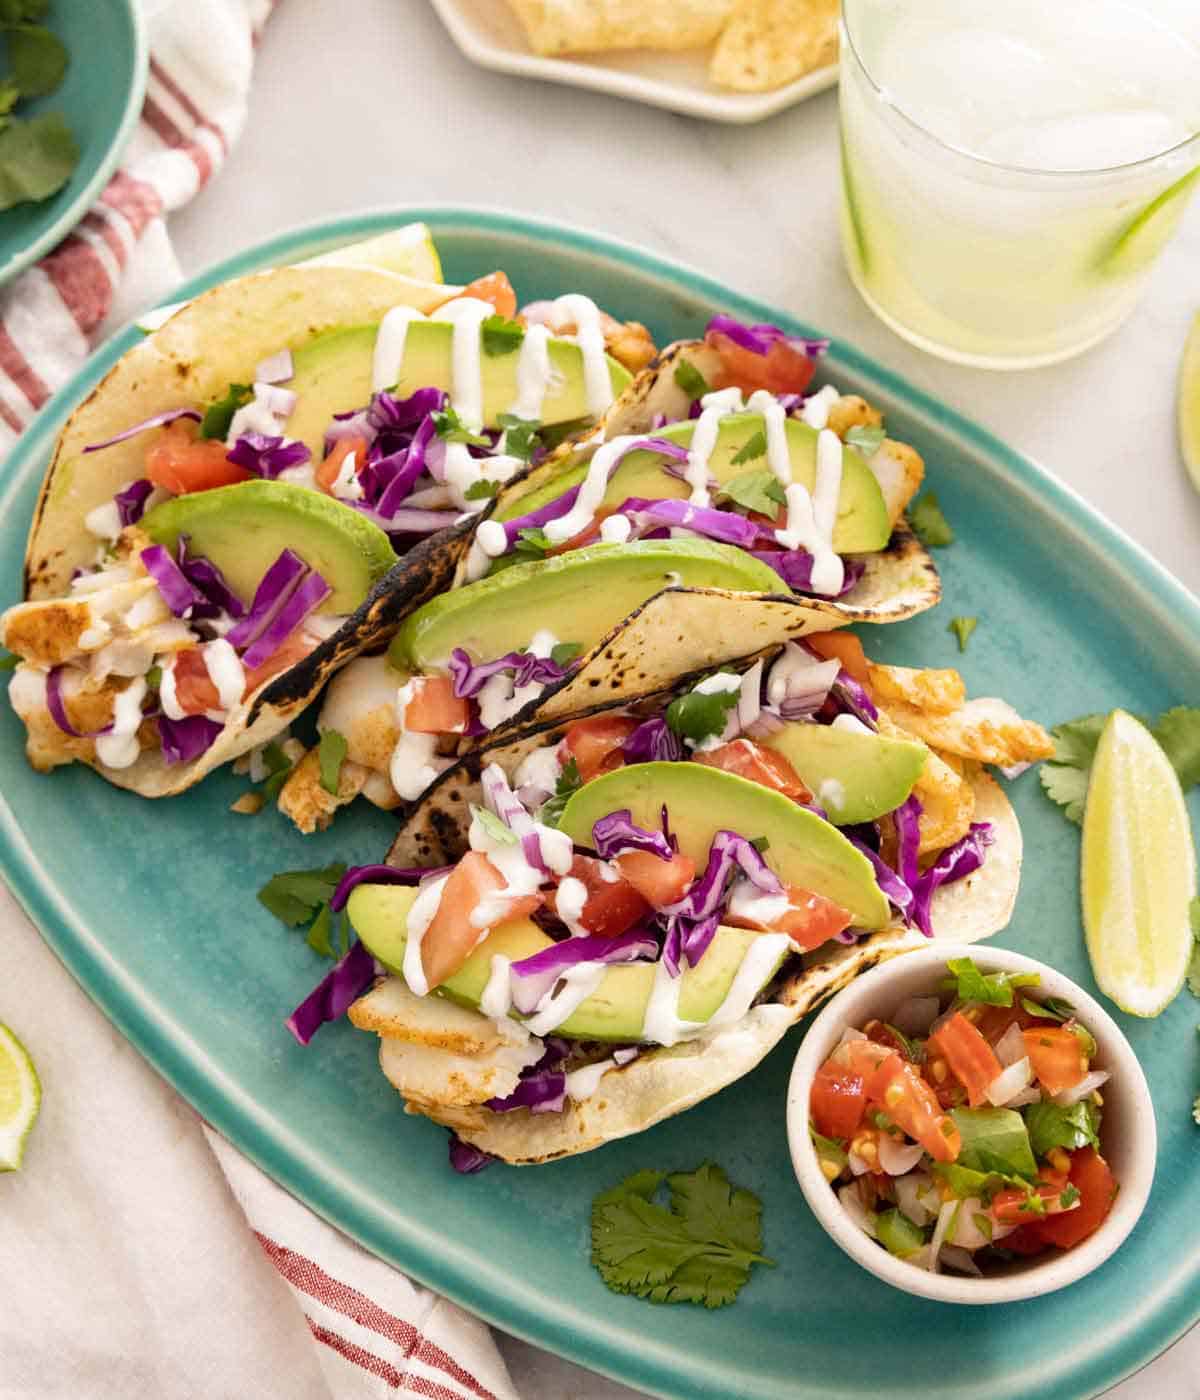 A platter of multiple fish tacos with extra toppings on the side.